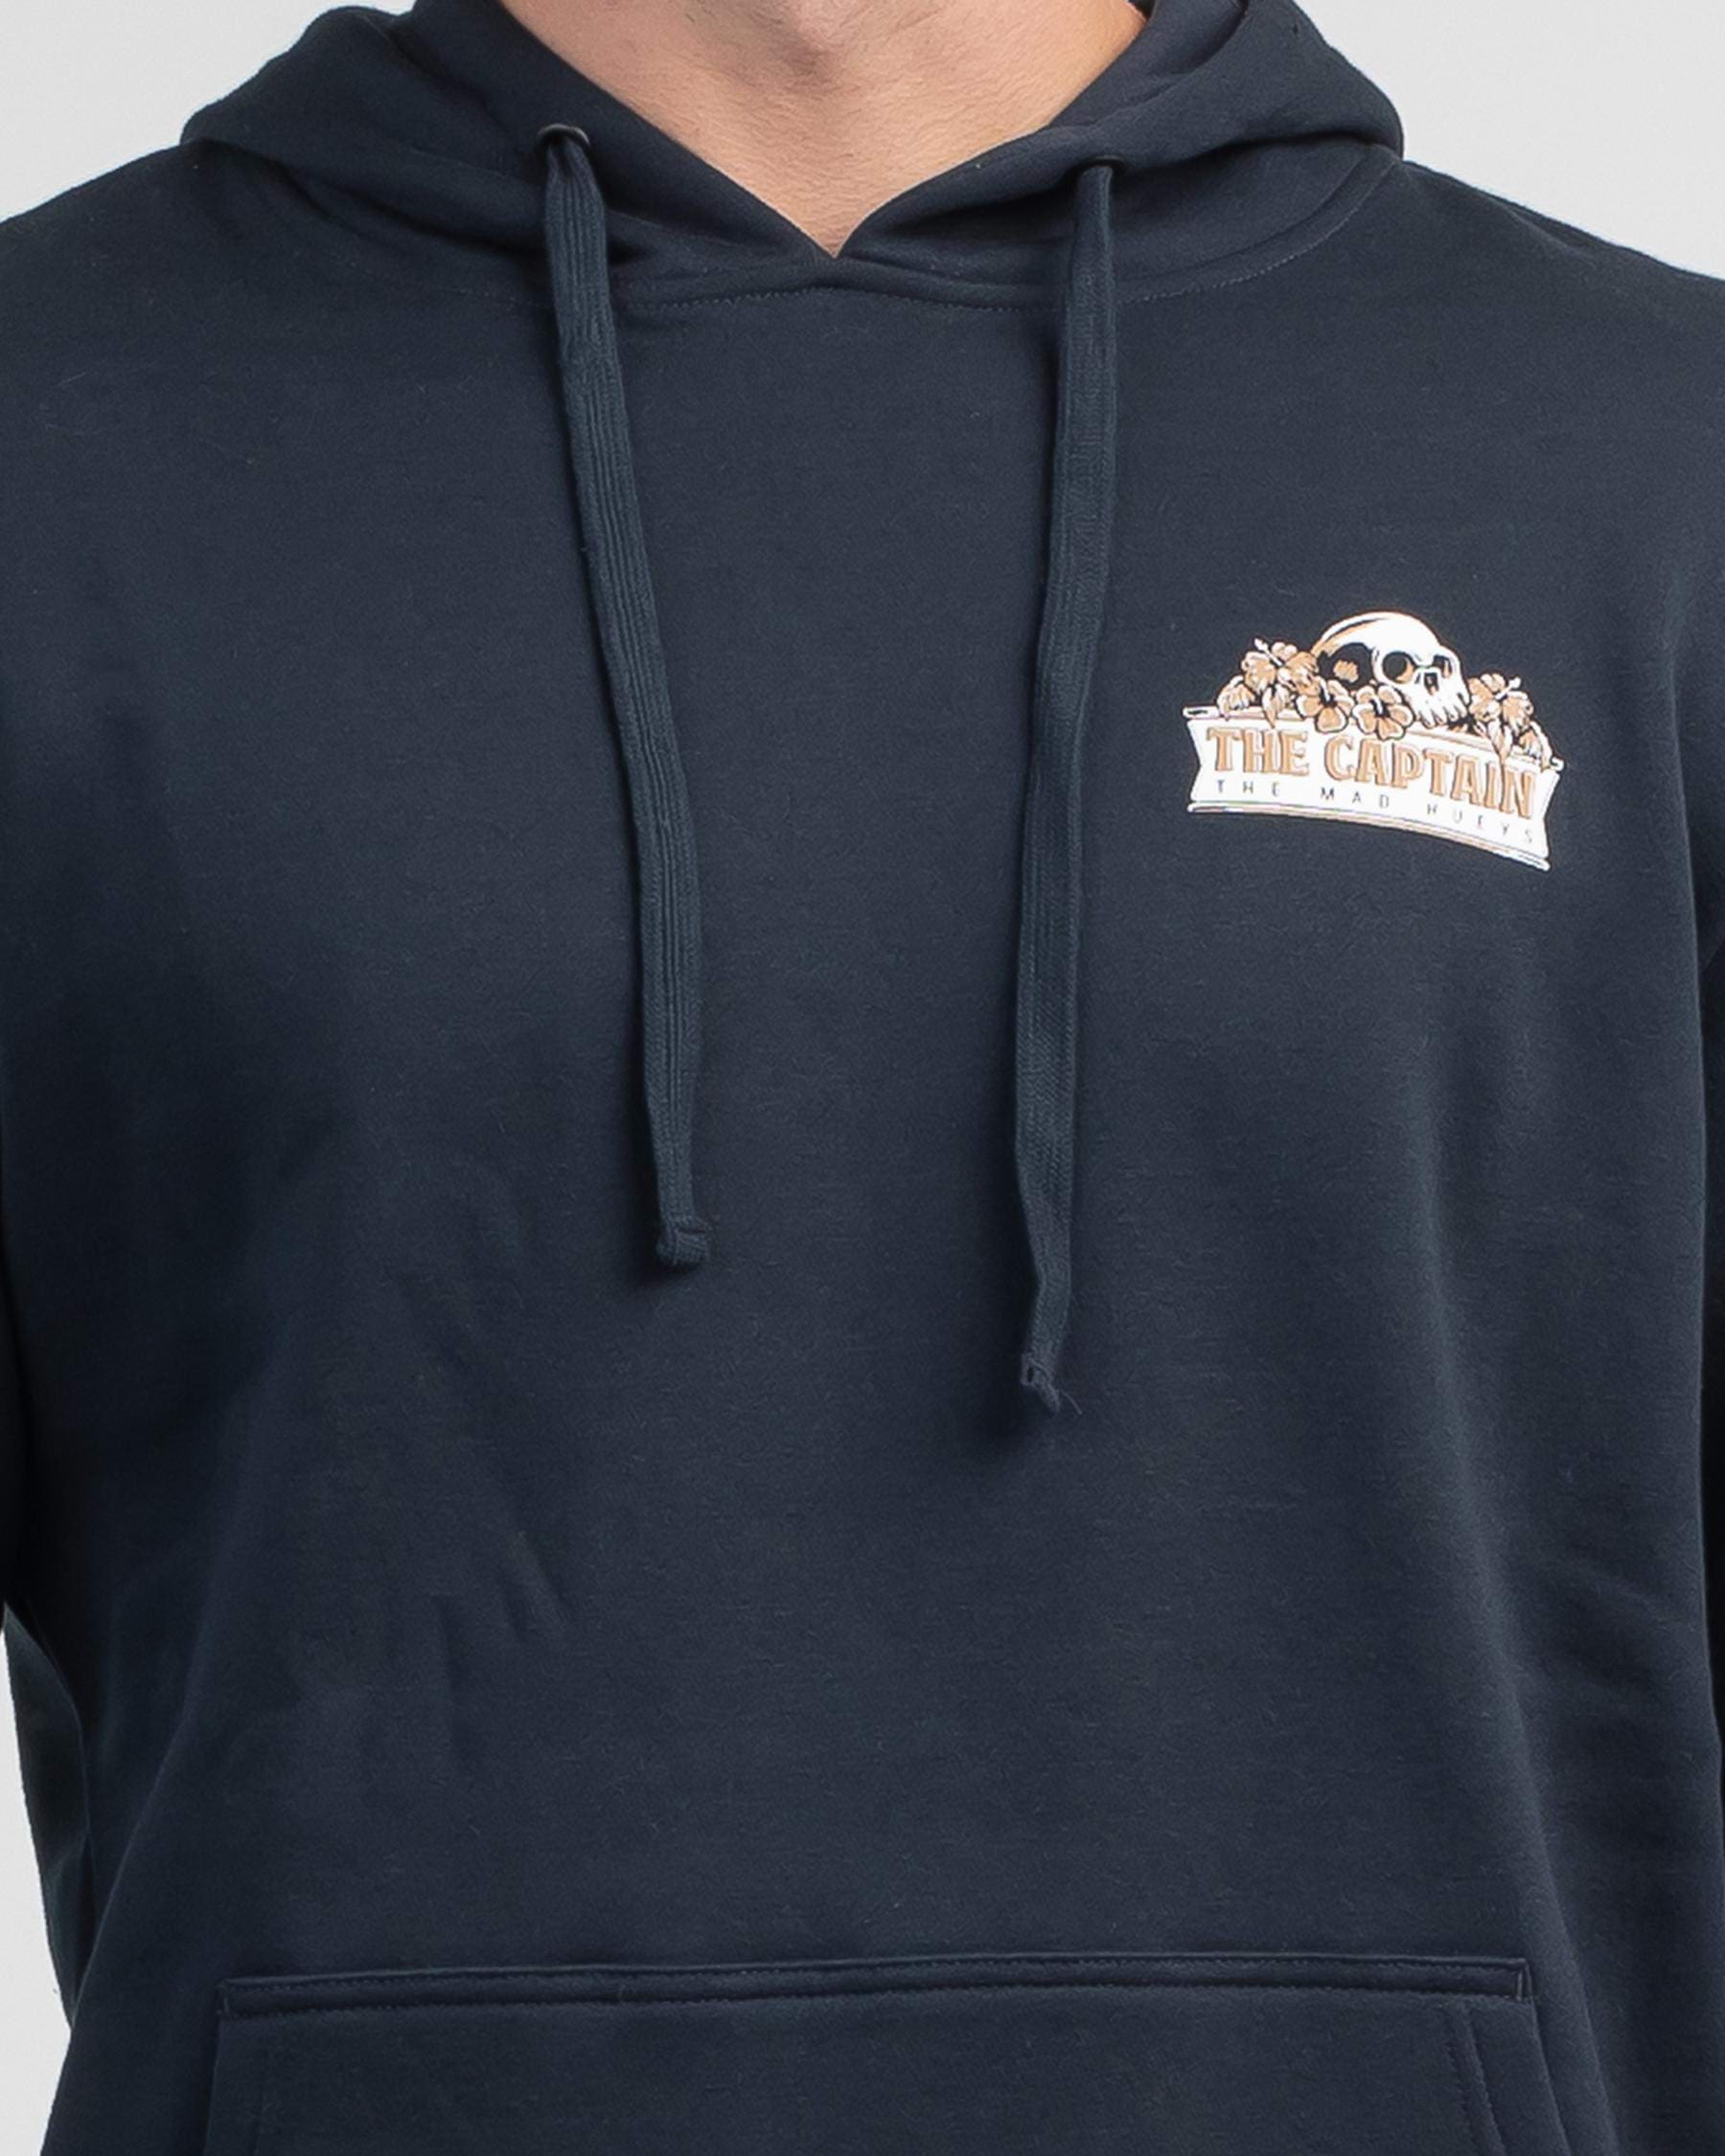 The Mad Hueys Tropic Captain Hoodie In Navy | City Beach United States